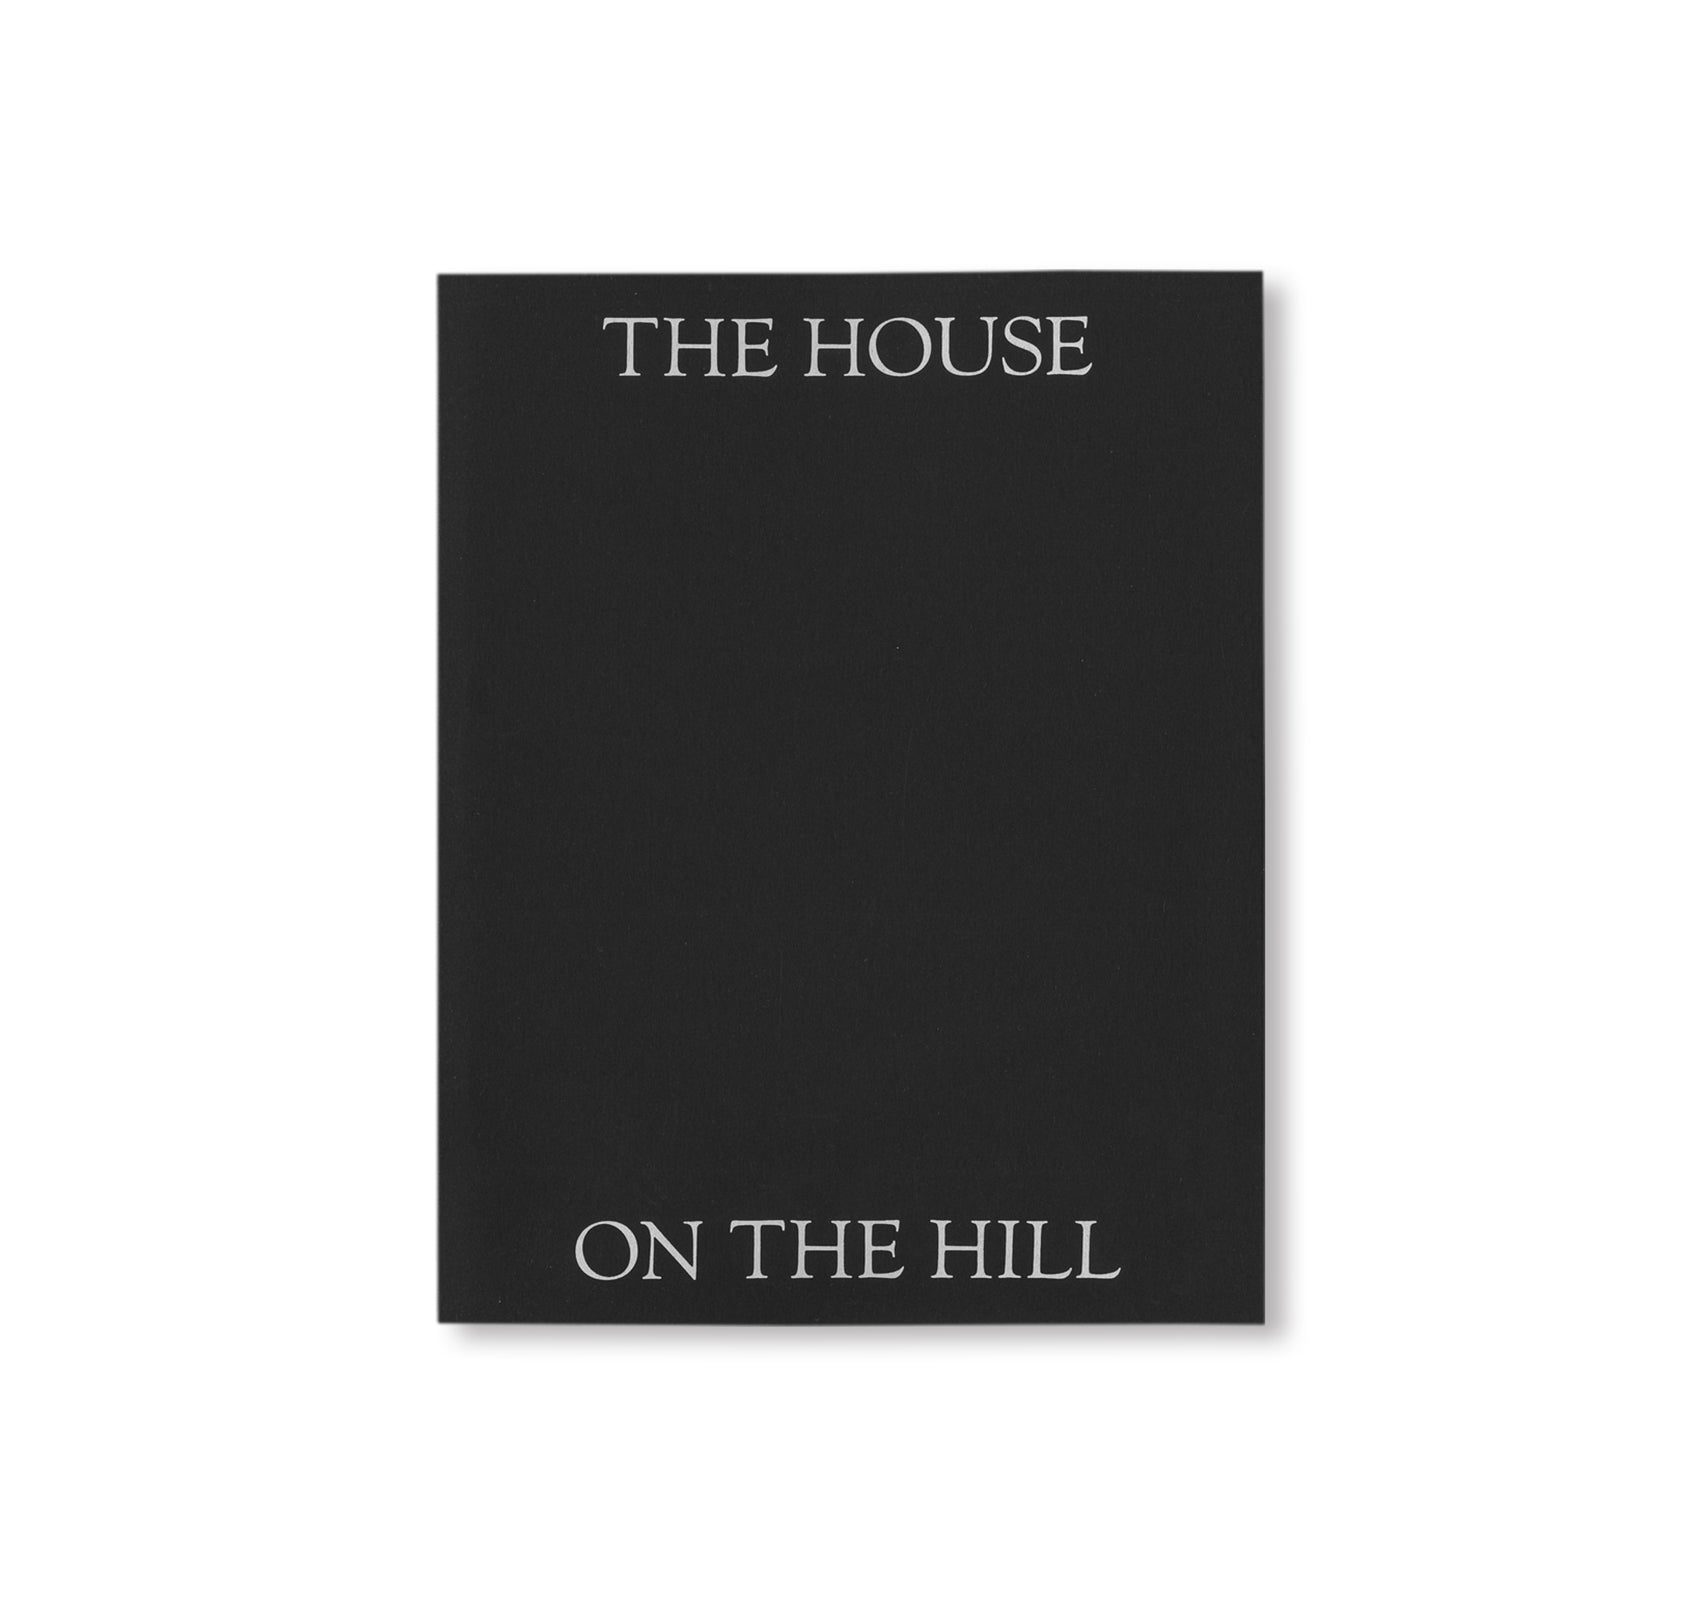 THE HOUSE ON THE HILL by Jørn Aagaard